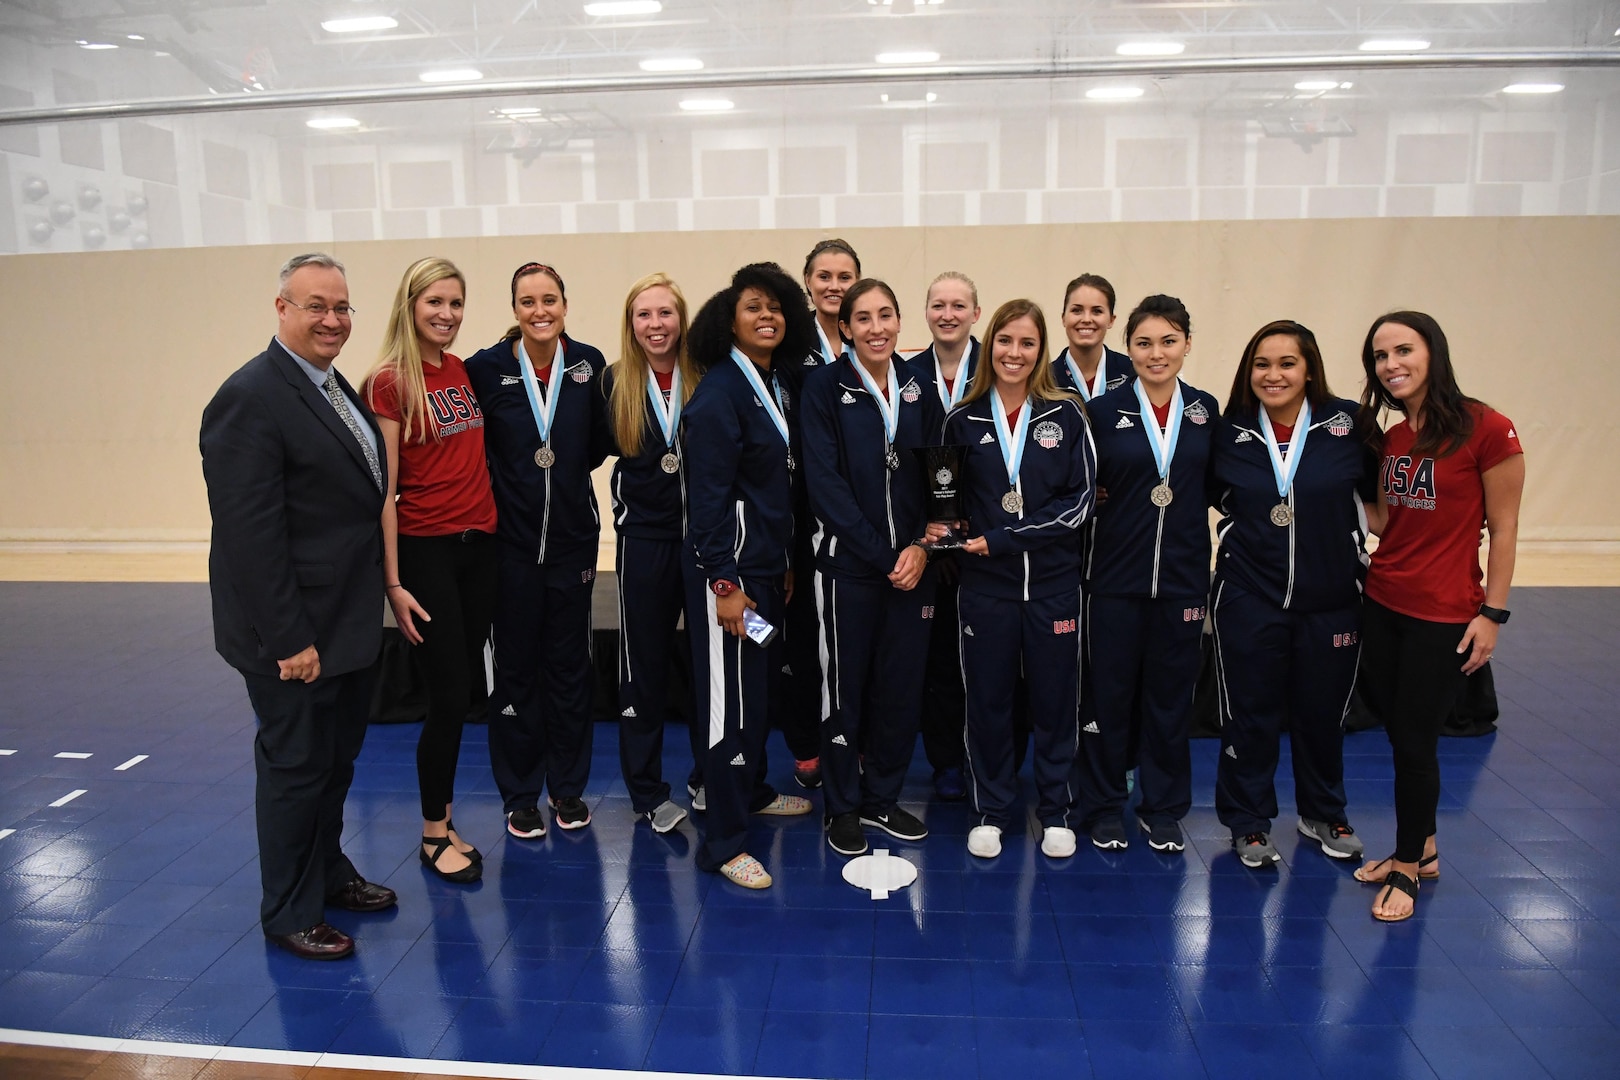 USA wins the silver medal of the 18th Conseil International du Sport Militaire (CISM) World Women’s Volleyball Military Championship on 9 June 2017 at Naval Station Mayport, Florida.